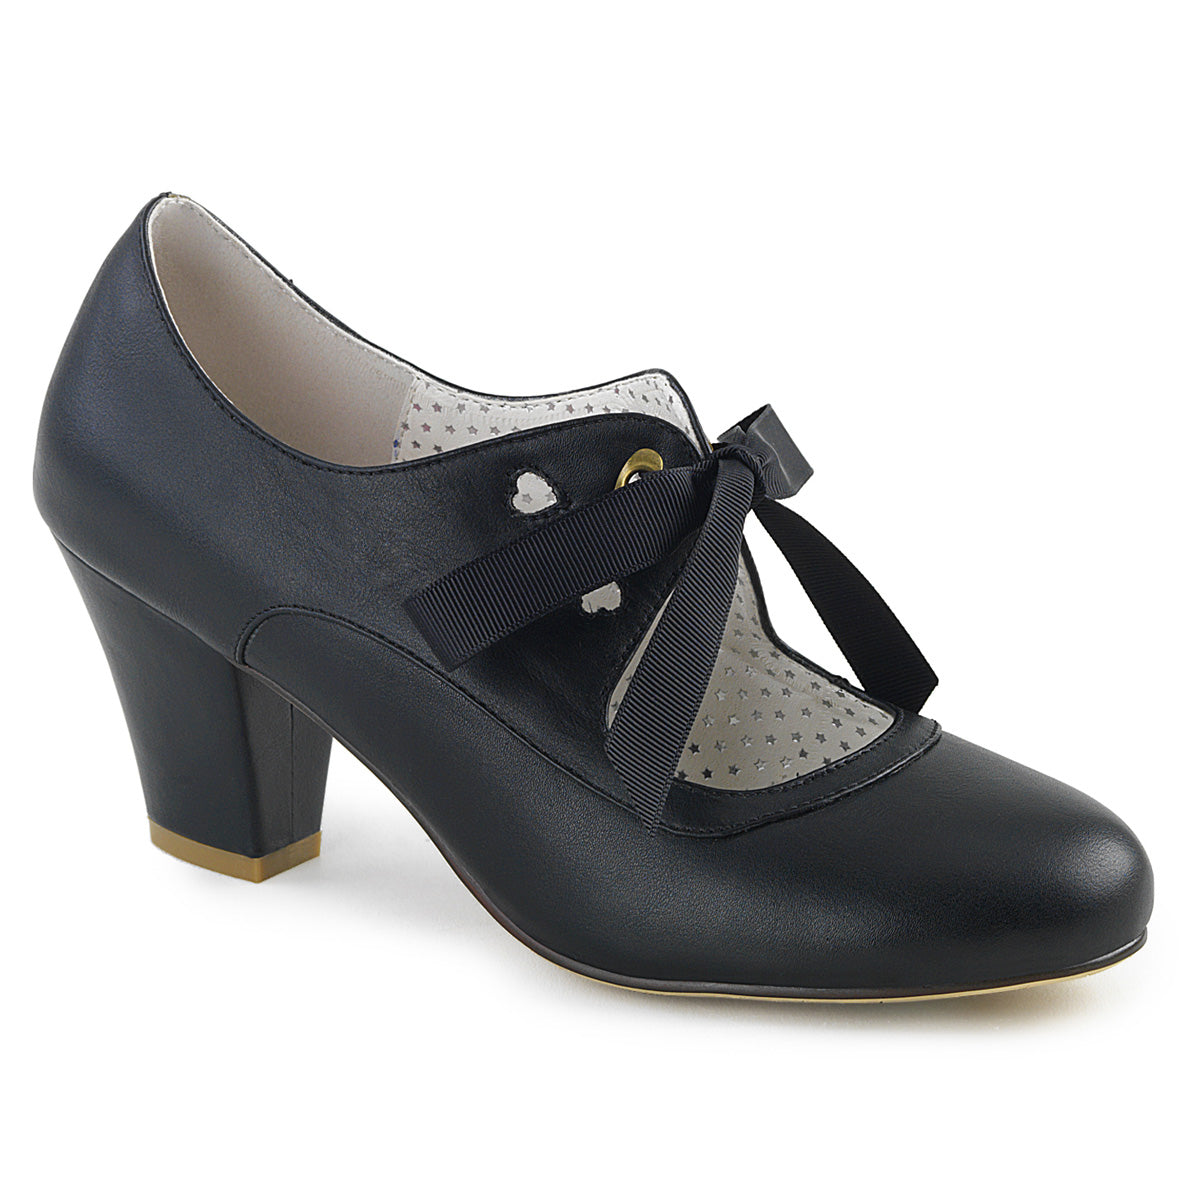 Wiggle-32 Pin Up Couture Glamour 2.5 "Heel Black Fetish Shoe